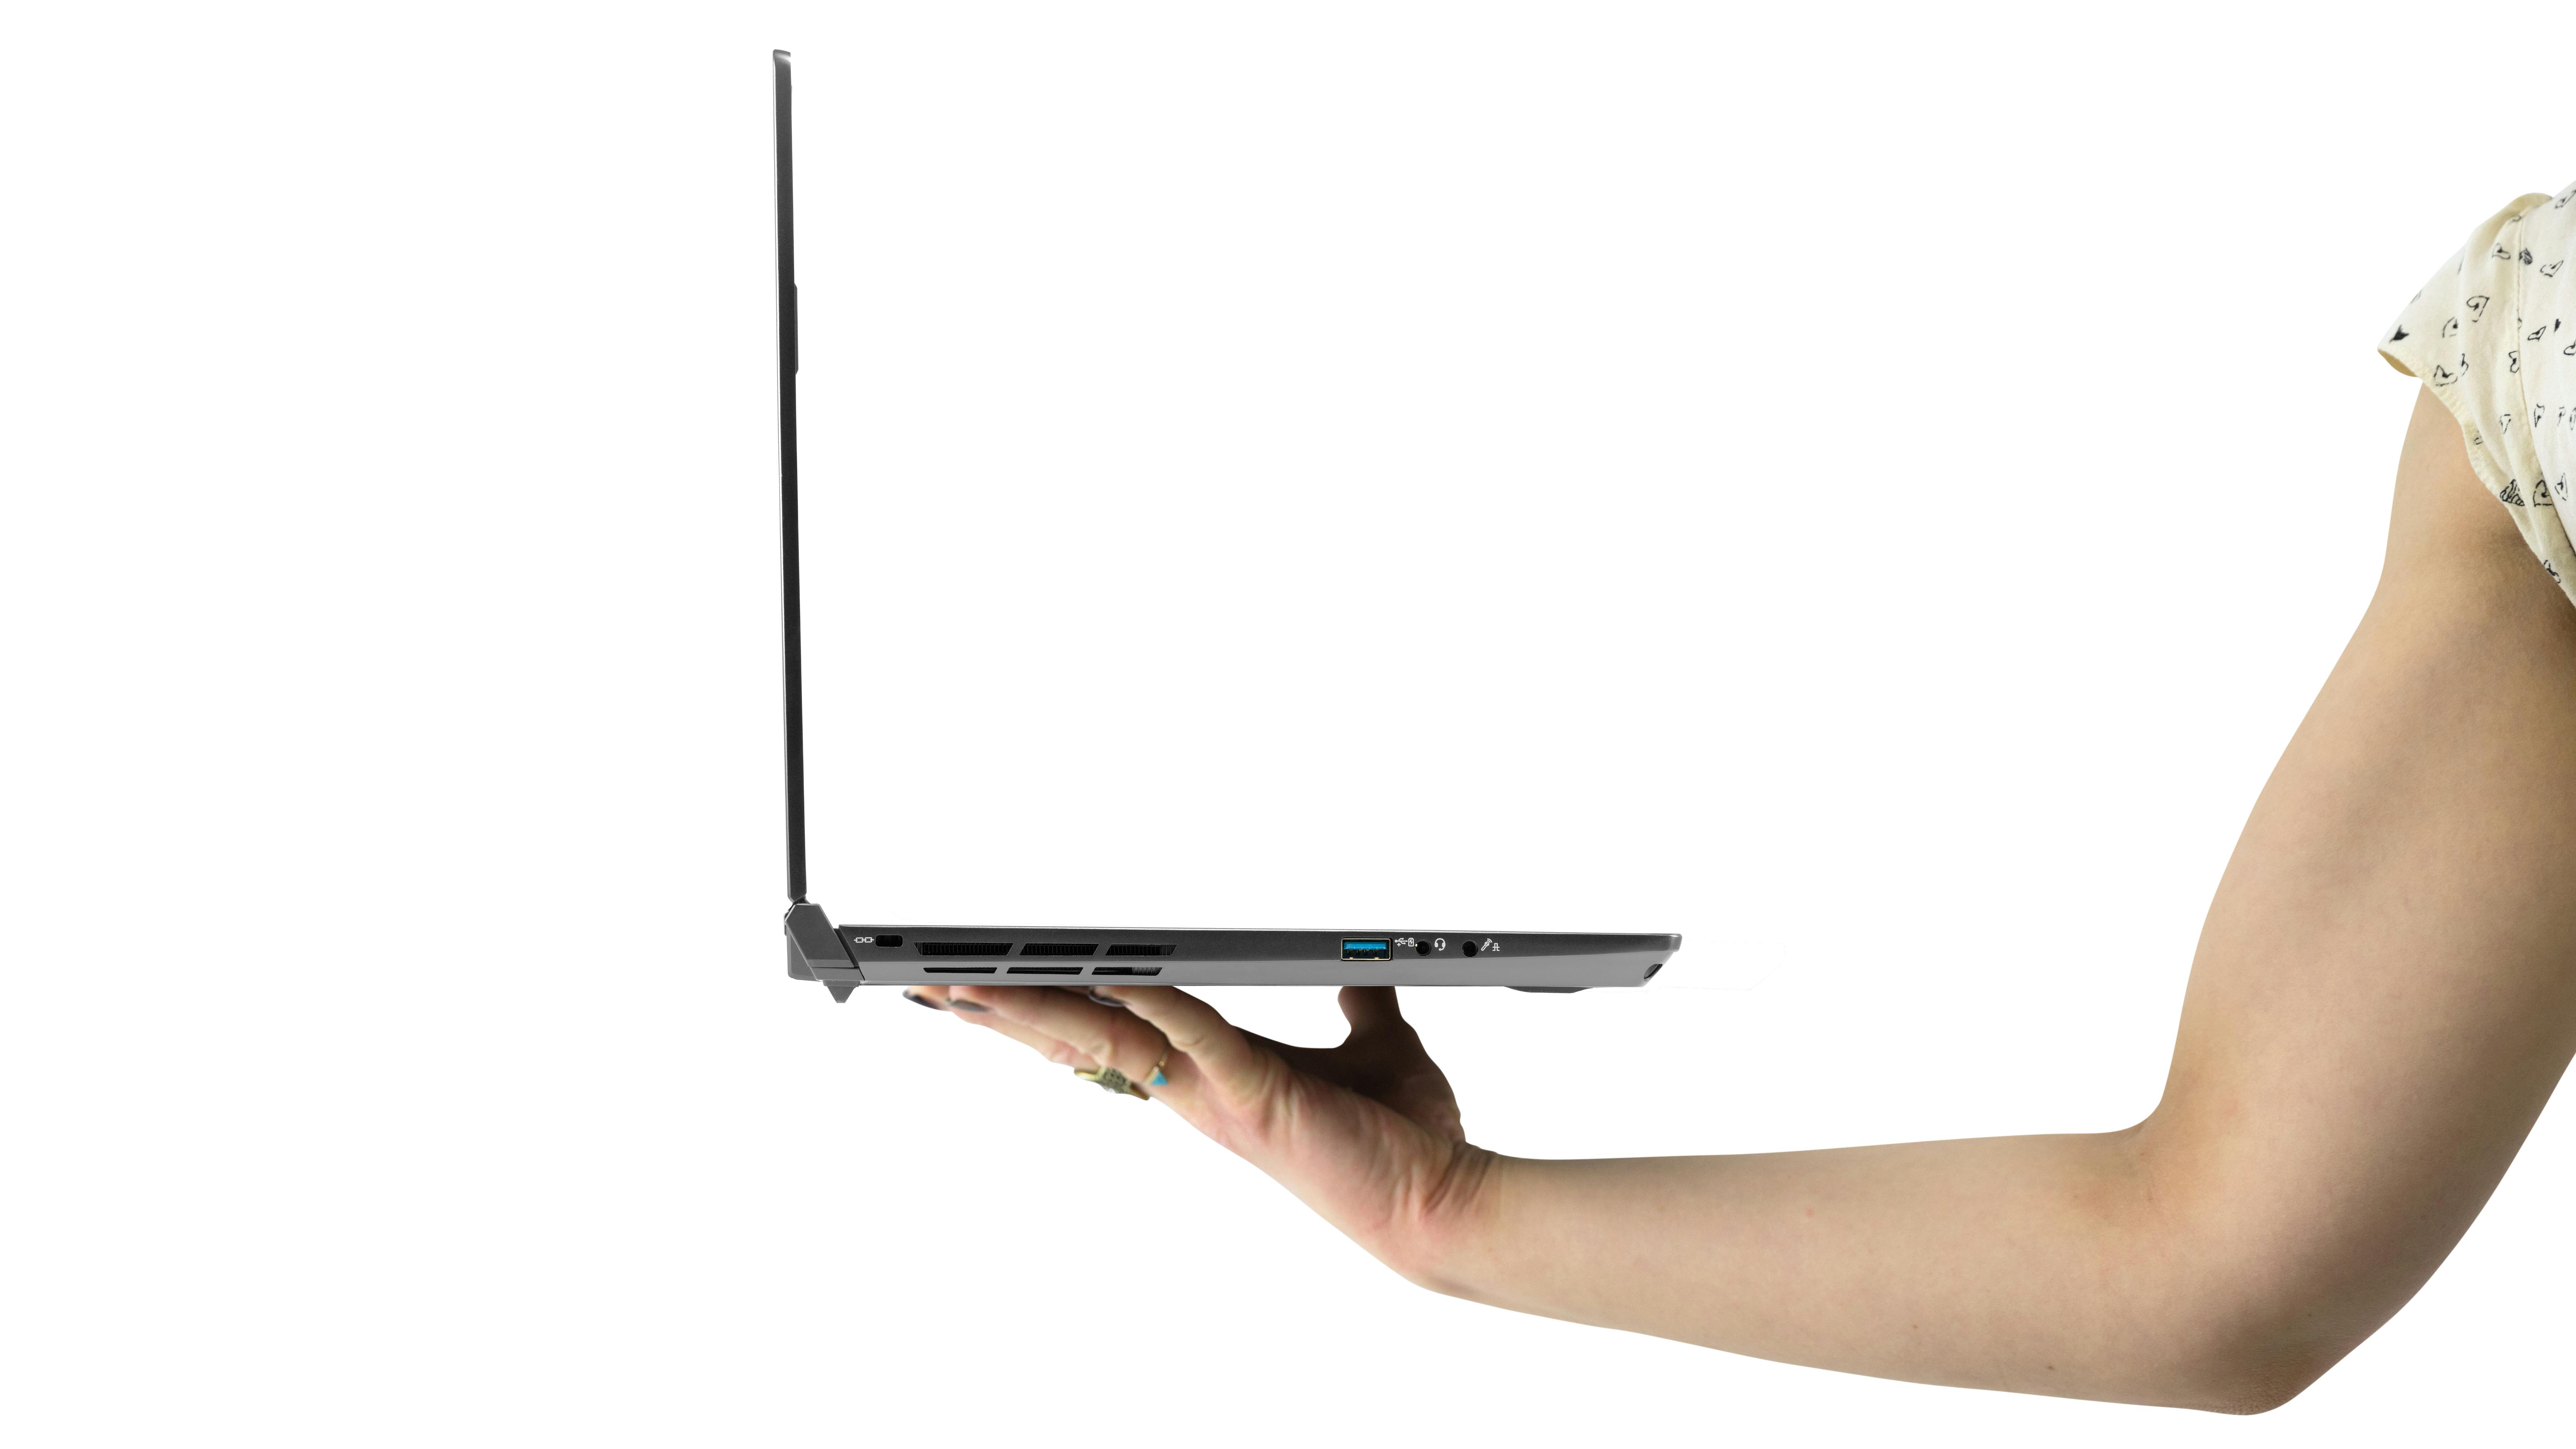 Someone holding the slim Oryx Pro laptop with one hand.